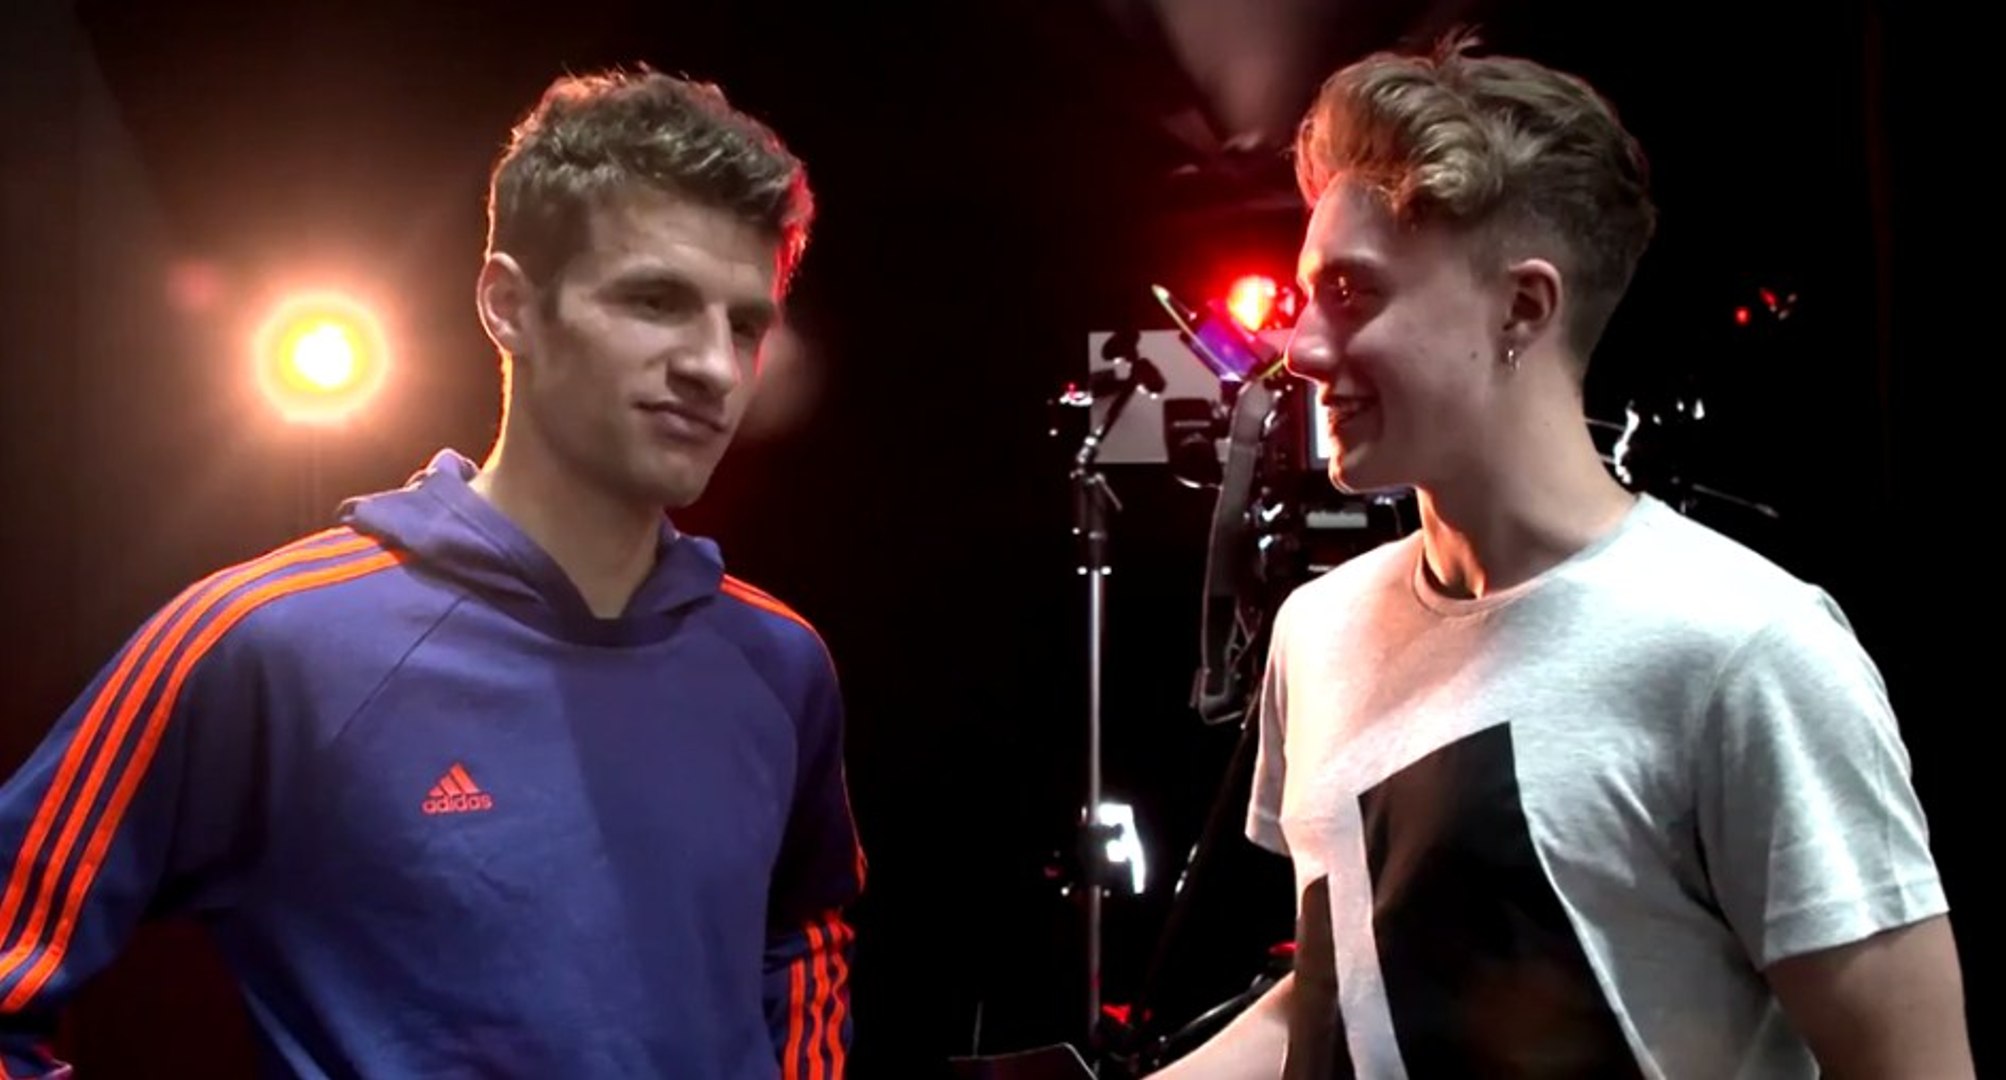 Funny interview with an english speaking Thomas Müller - video Dailymotion